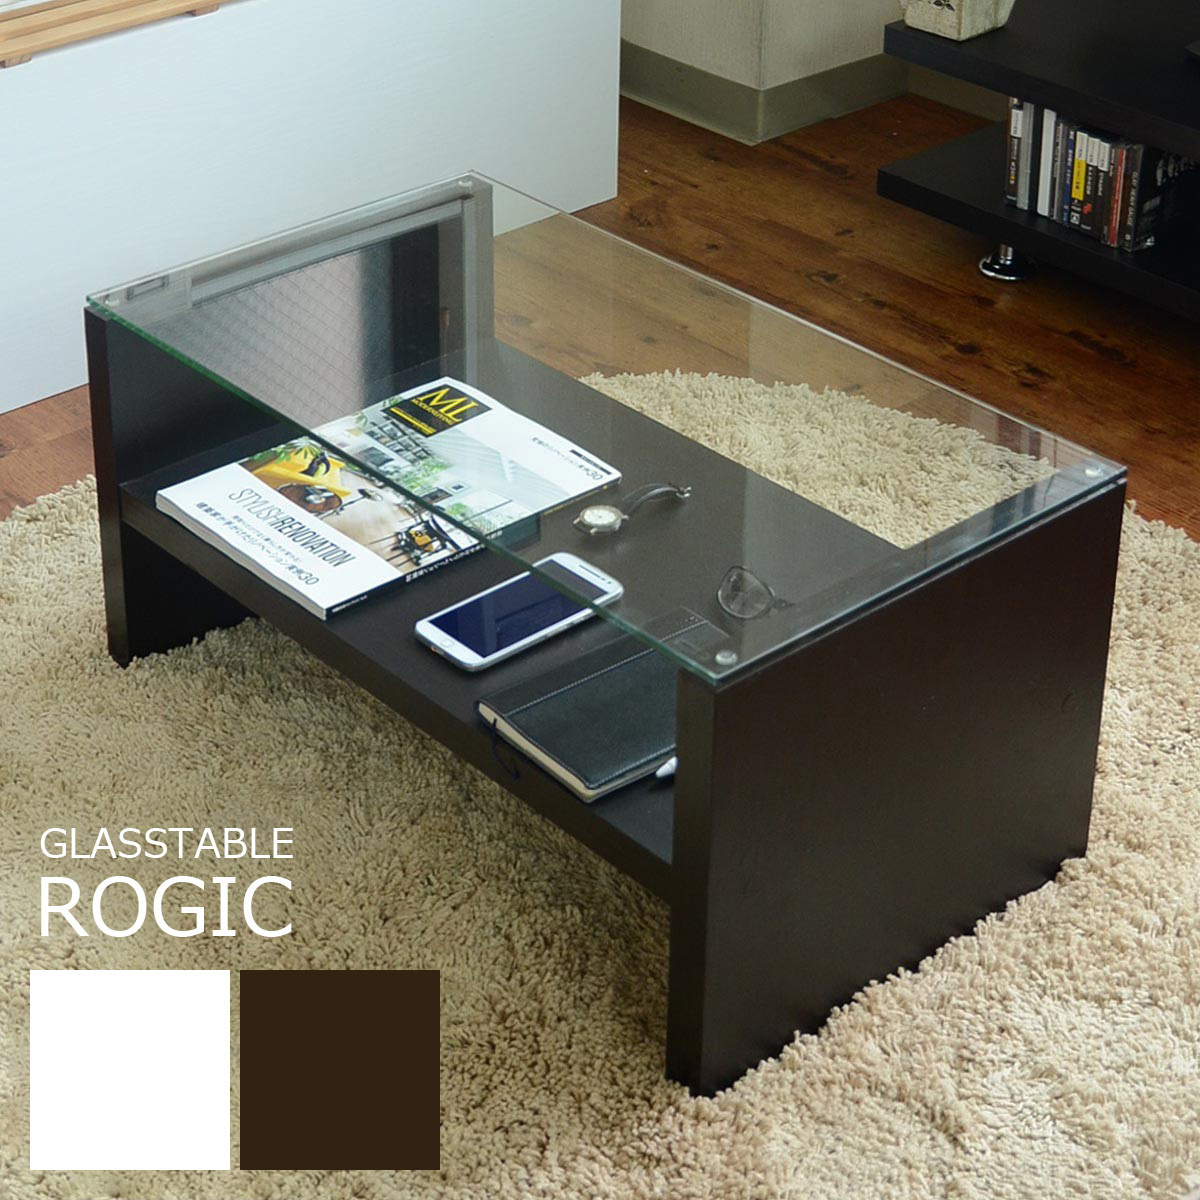  glass table glass table stylish low table glass wooden Northern Europe simple modern coffee table new life 